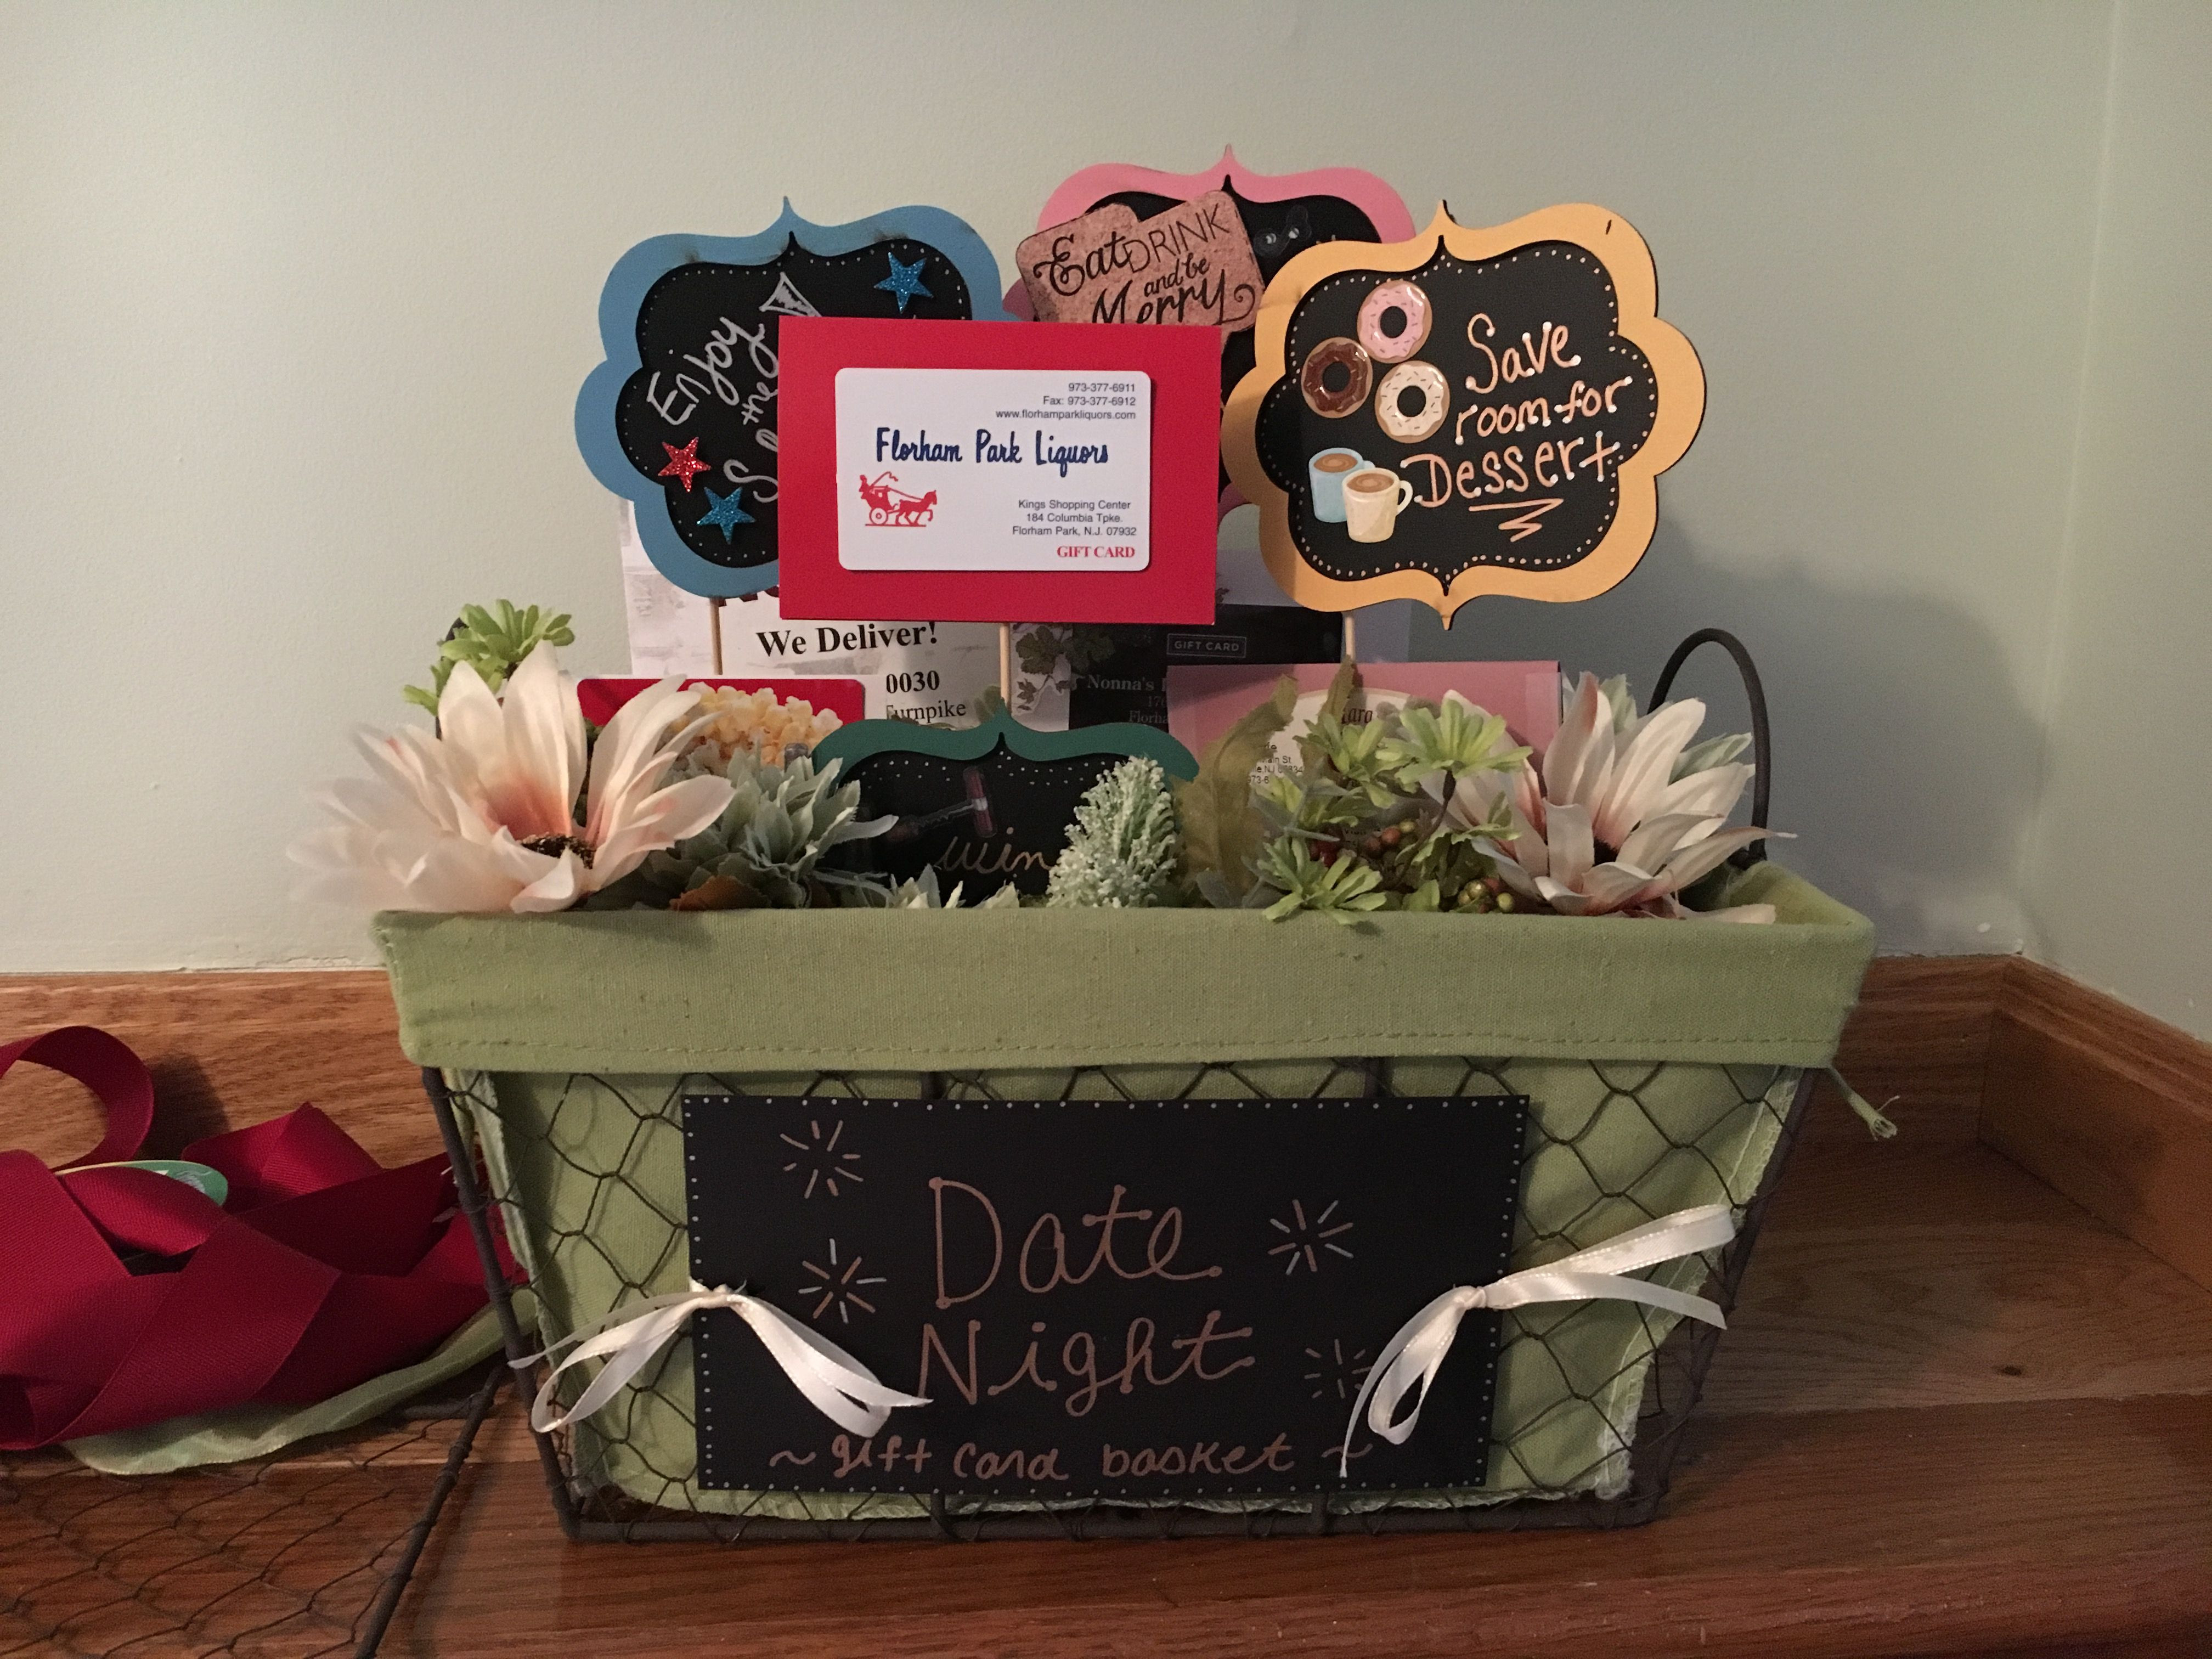 Date Night Gift Basket Ideas
 Tricky tray basket Cute idea for a date night with dinner